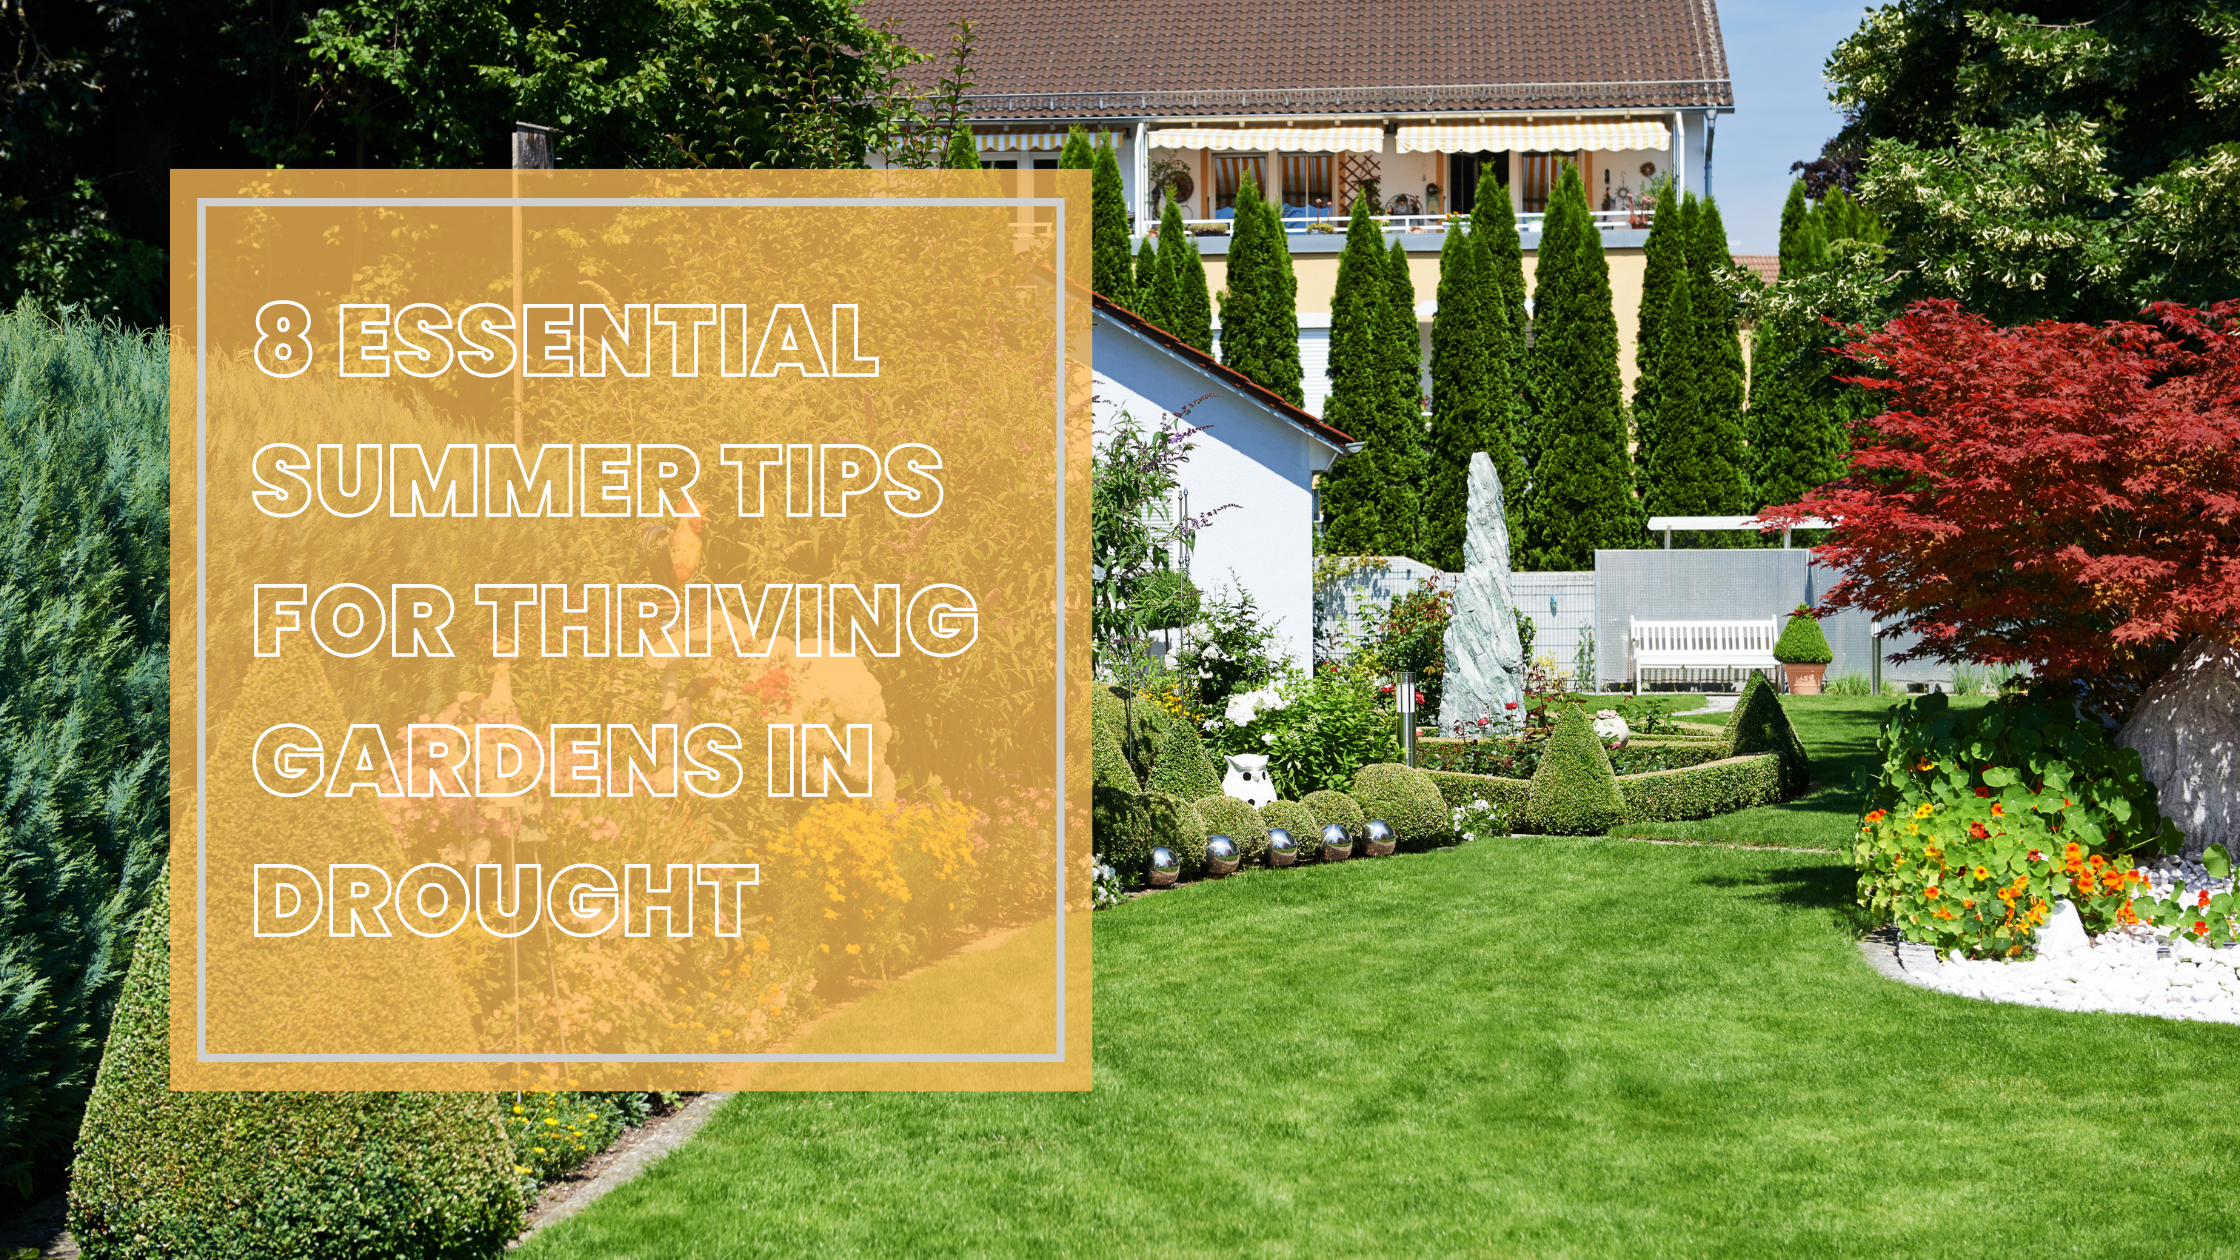 8 Essential Summer Tips for Thriving Gardens in Drought